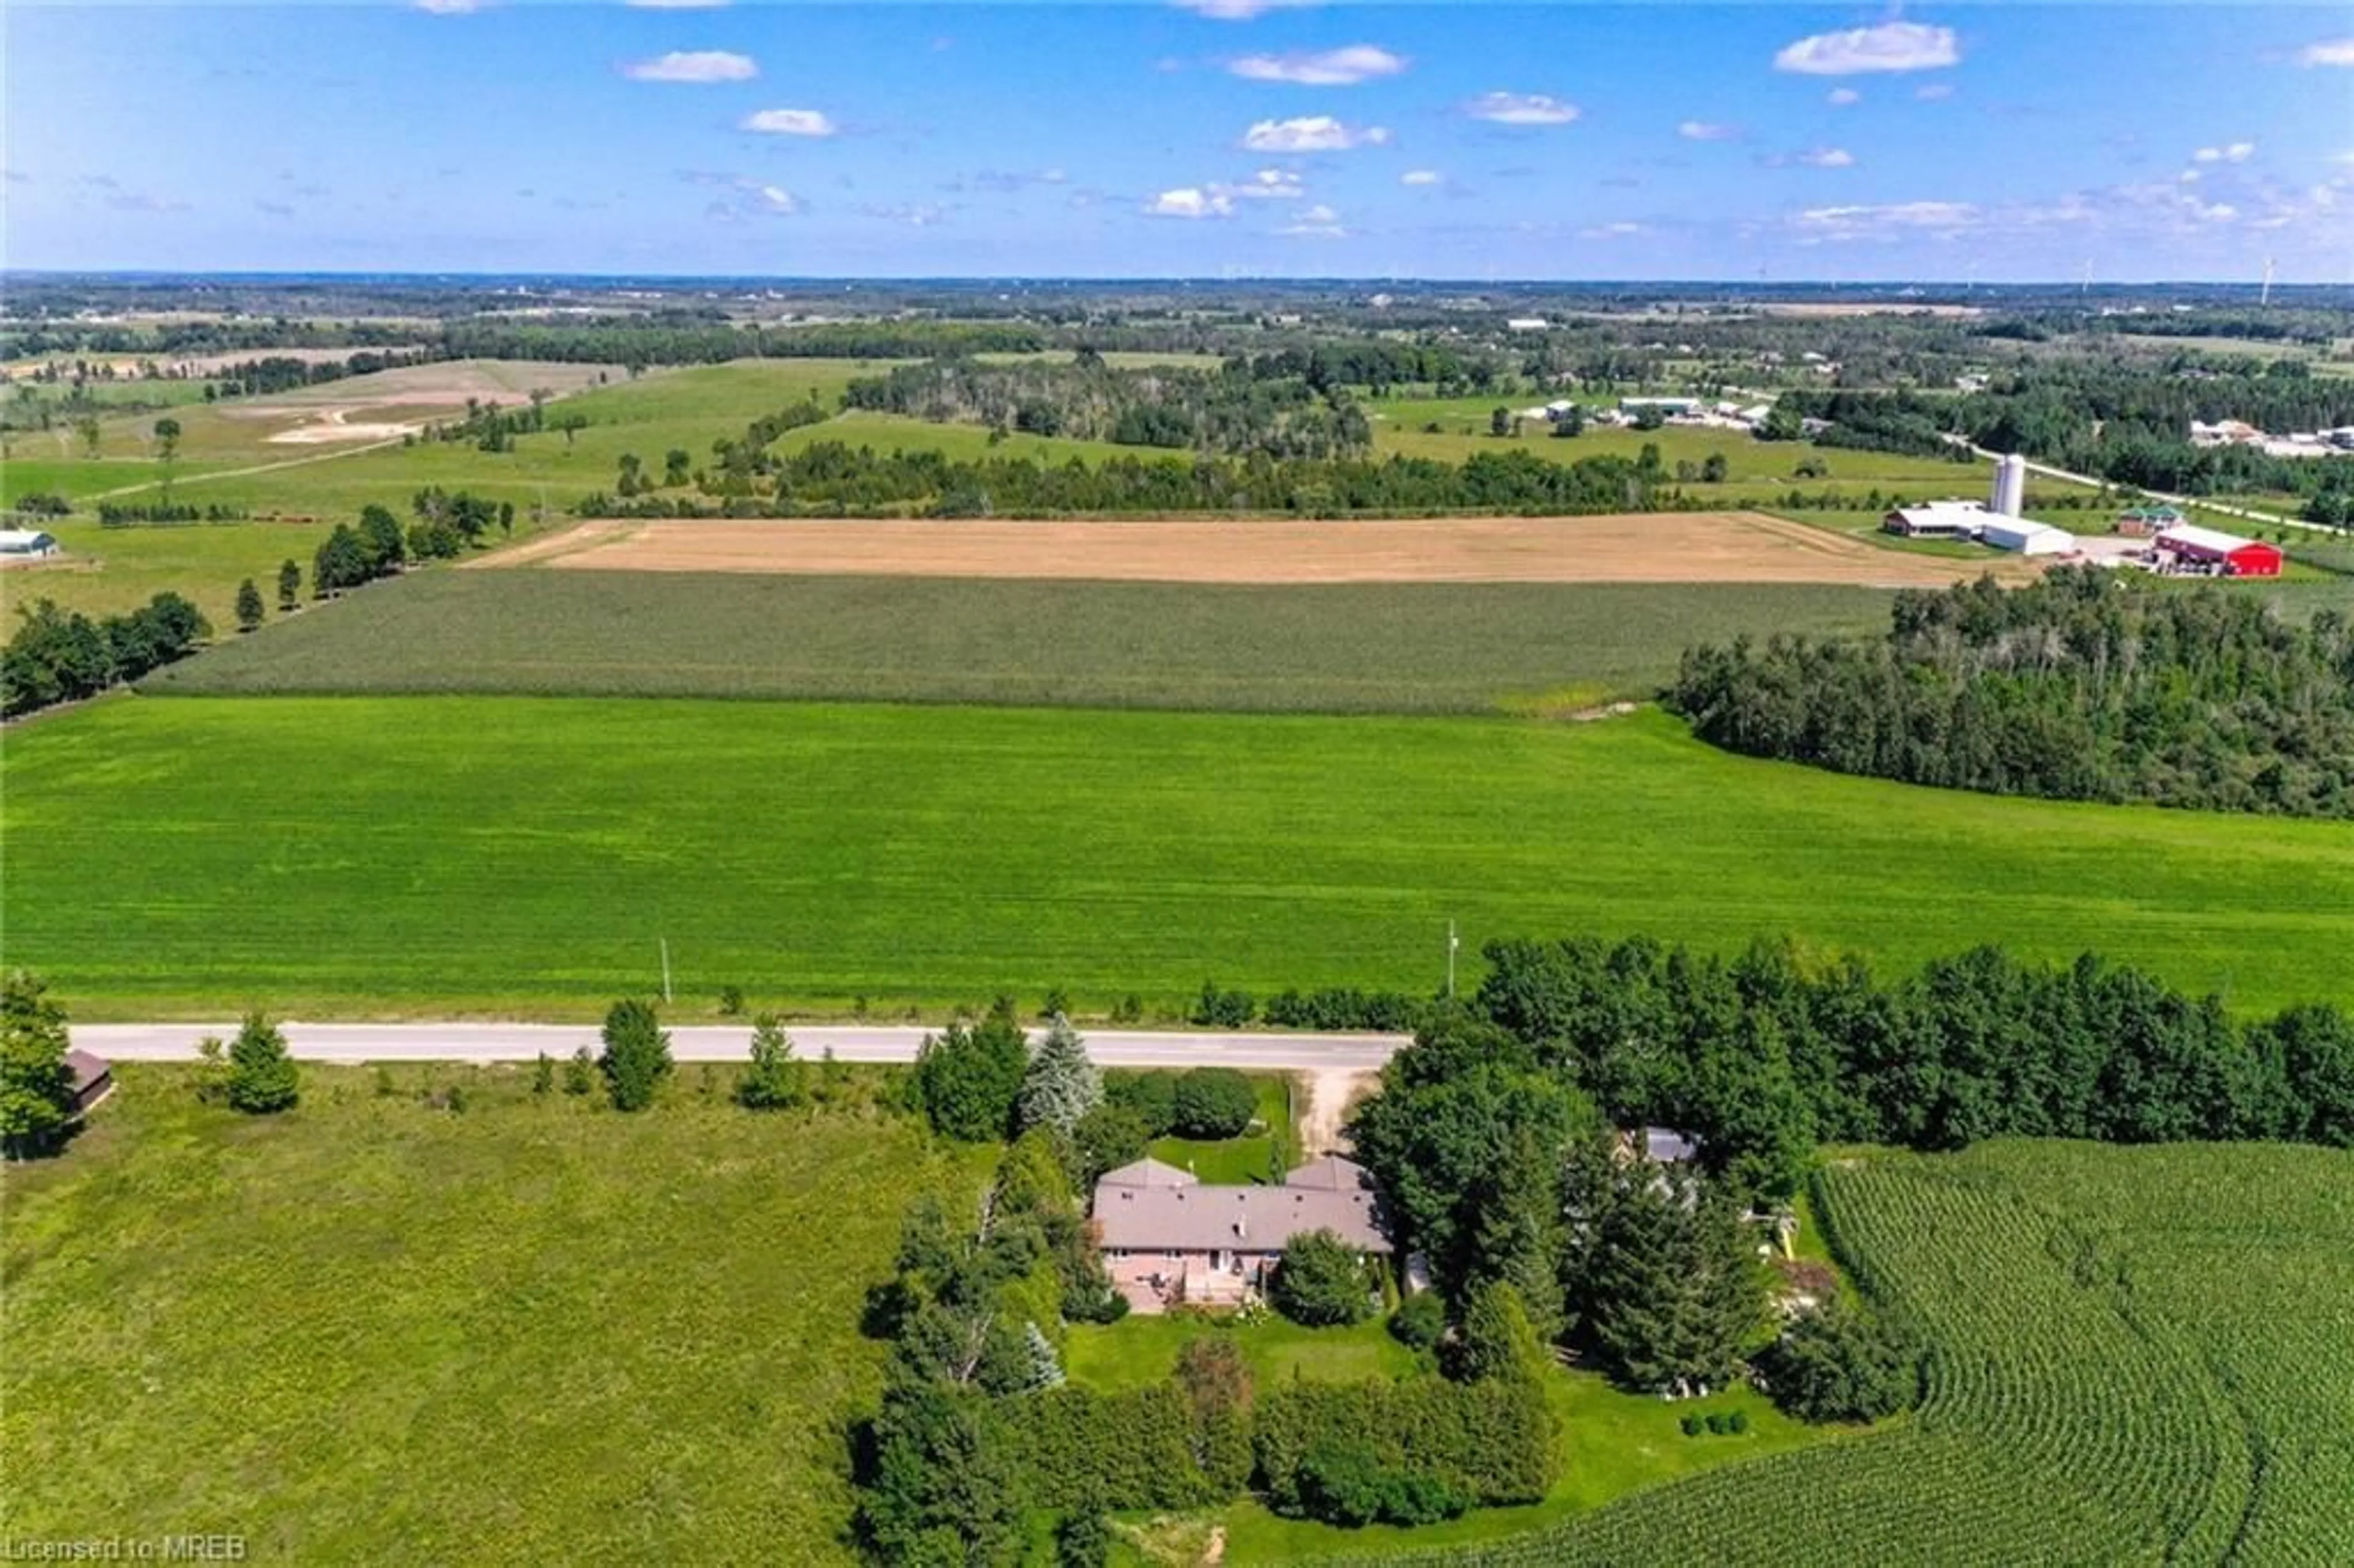 Lakeview for 733036 Southgate Sideroad 73 Sideroad, Southgate Ontario N0C 1L0